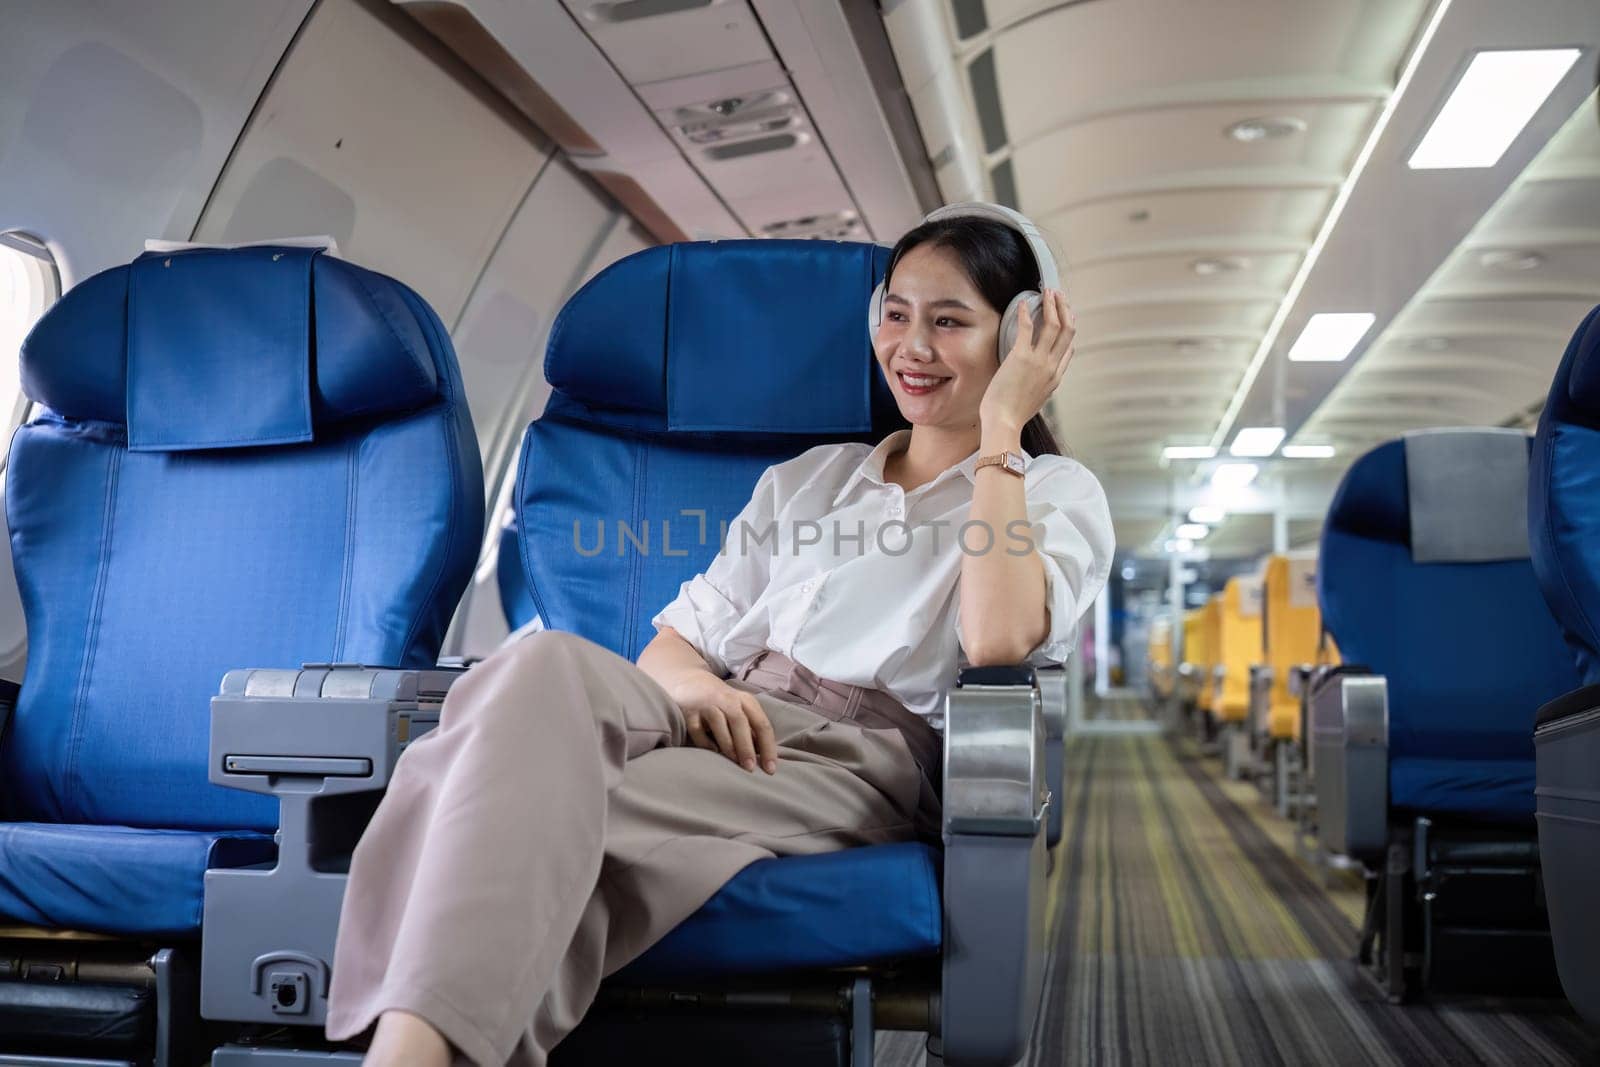 Young woman wearing headphones listening to music during travel, sitting near window in first class on airplane during flight, travel and business concept.